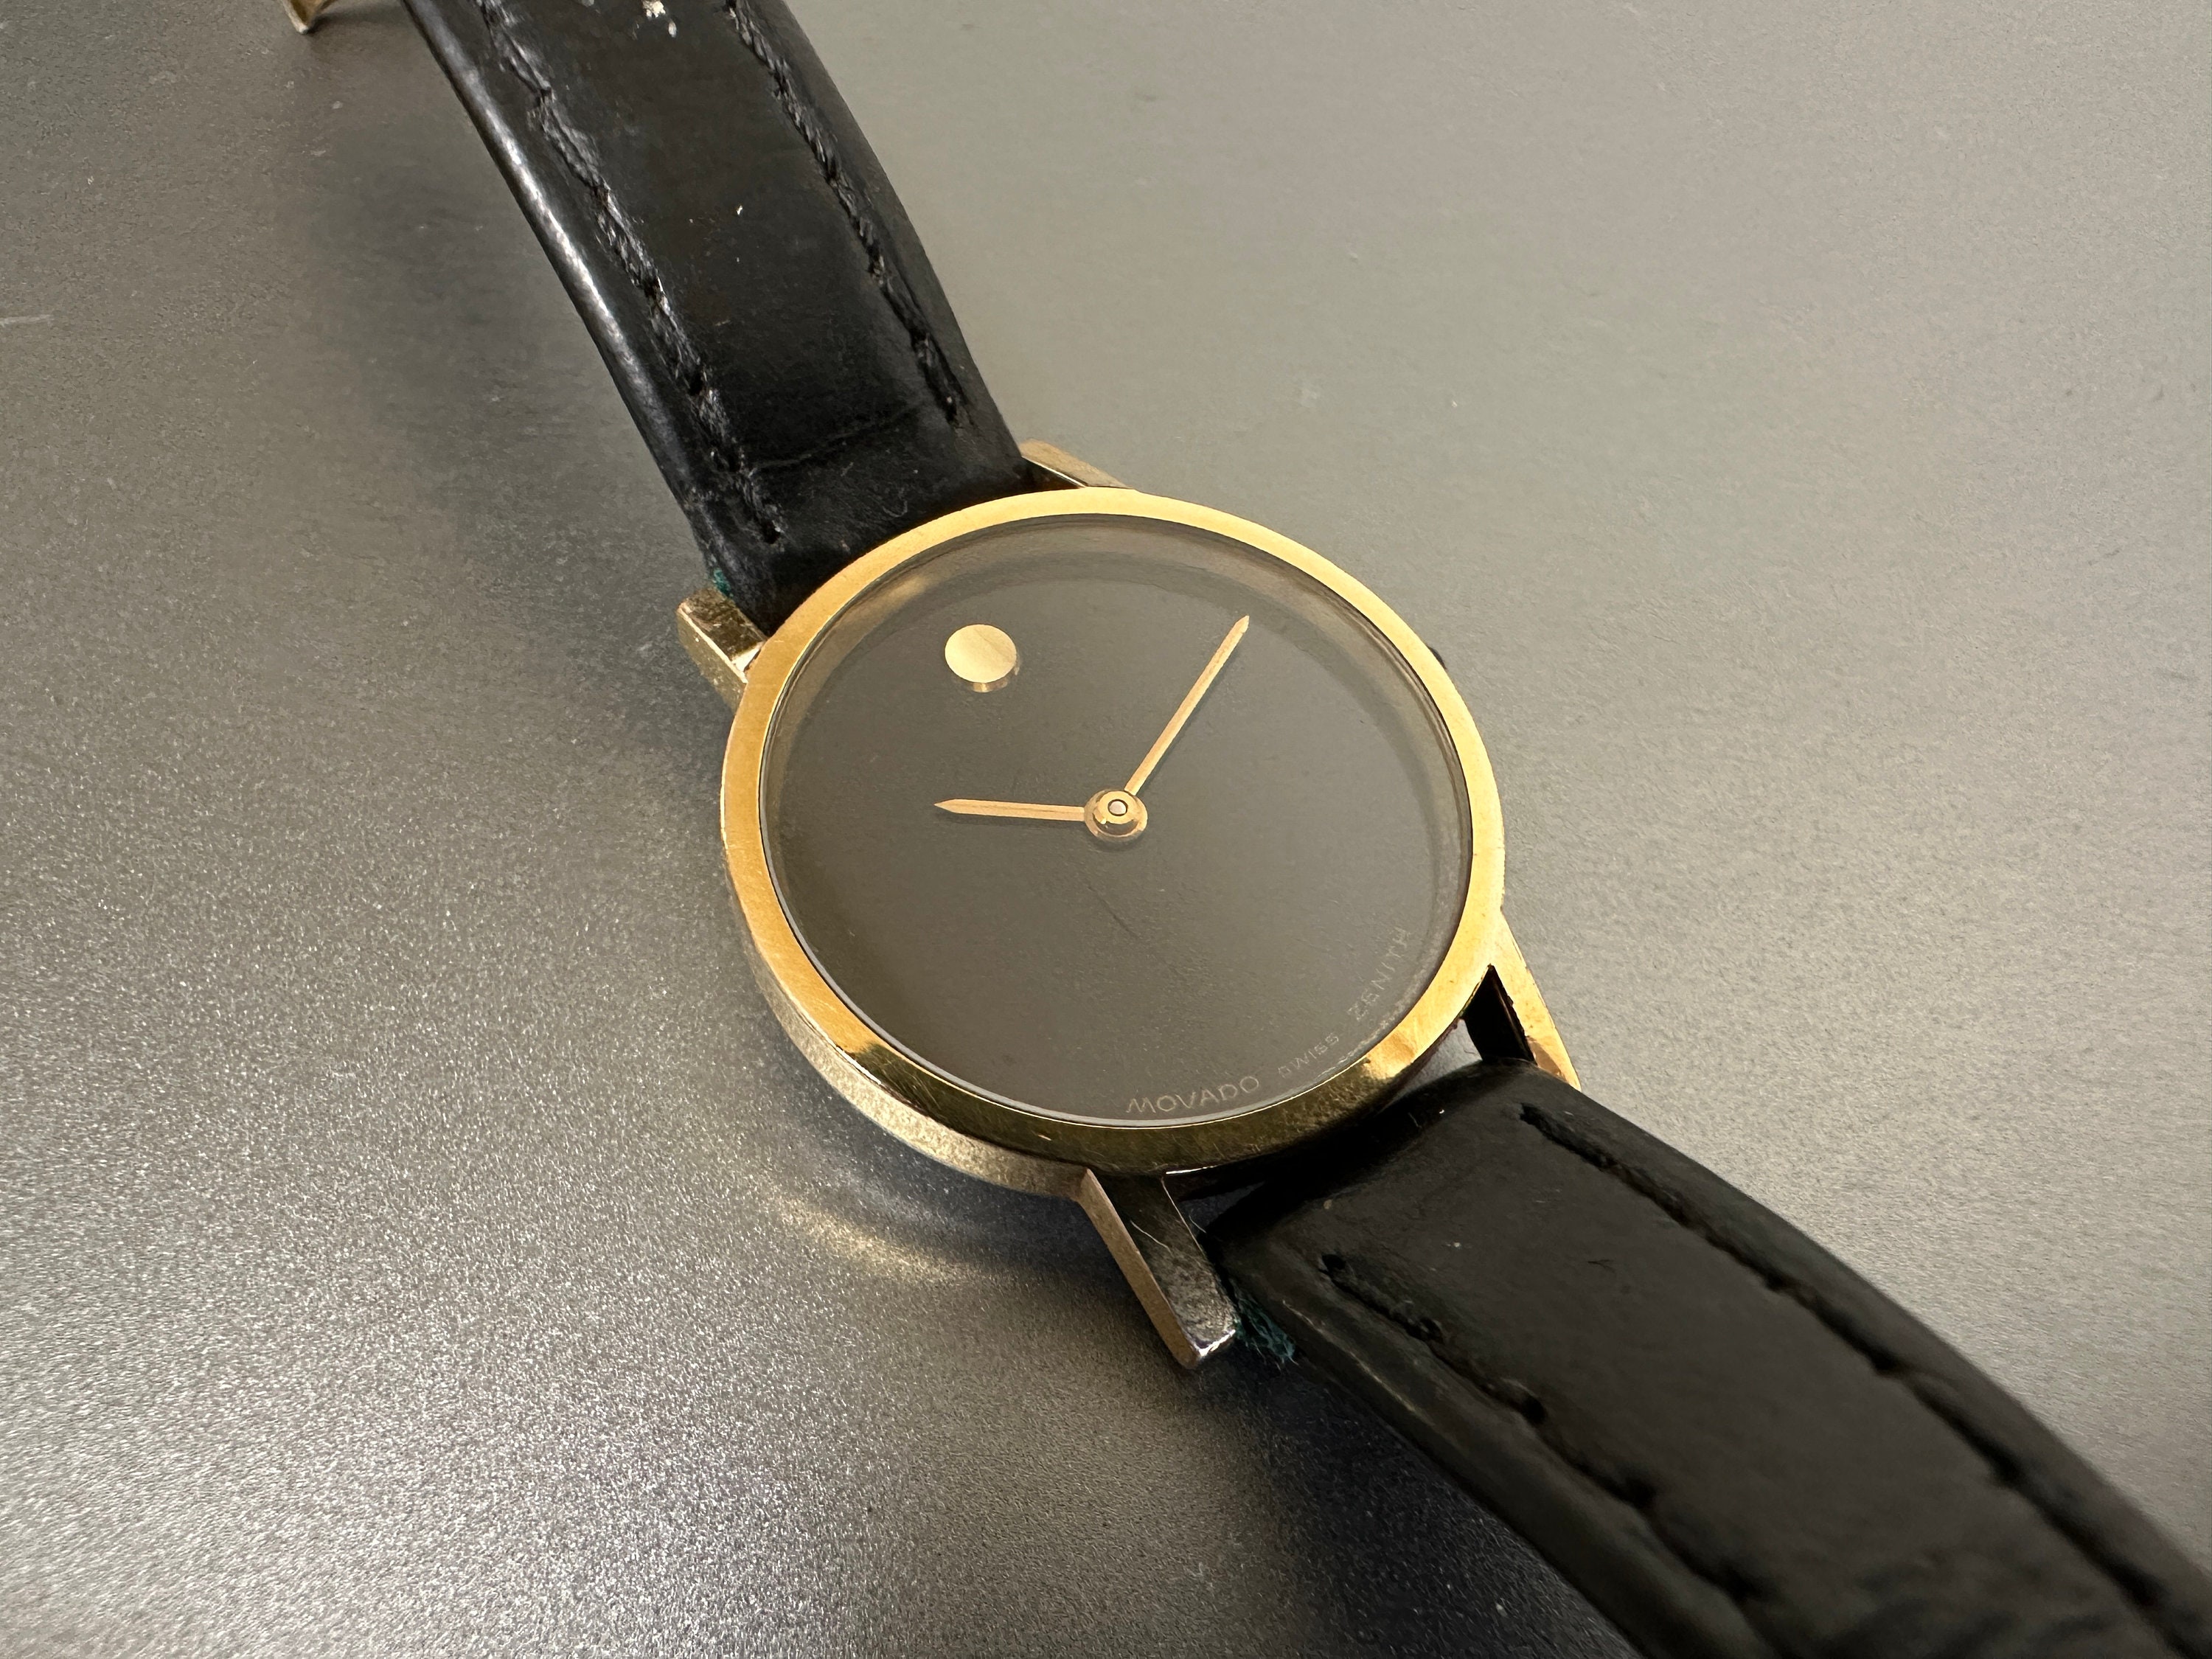 Vintage Solid 14k MOVADO Museum by ZENITH Winding Ladies Watch 36 2180  305*EXLNT - Fashion Ace, Inc